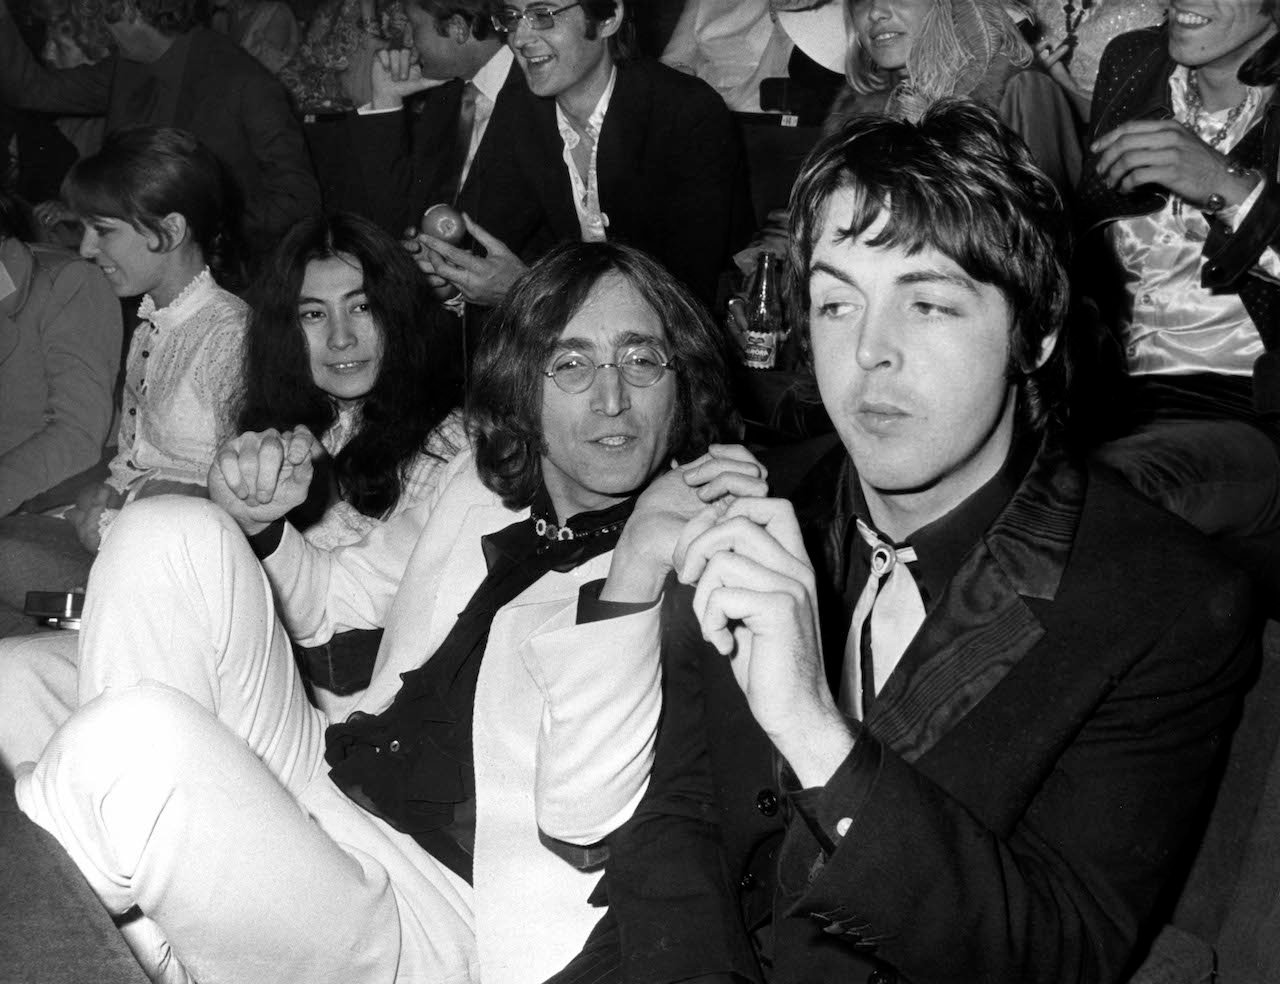 Paul McCartney, pictured (R) with John Lennon and Yoko Ono, said Lennon 'turned nasty' after The Beatles' split 